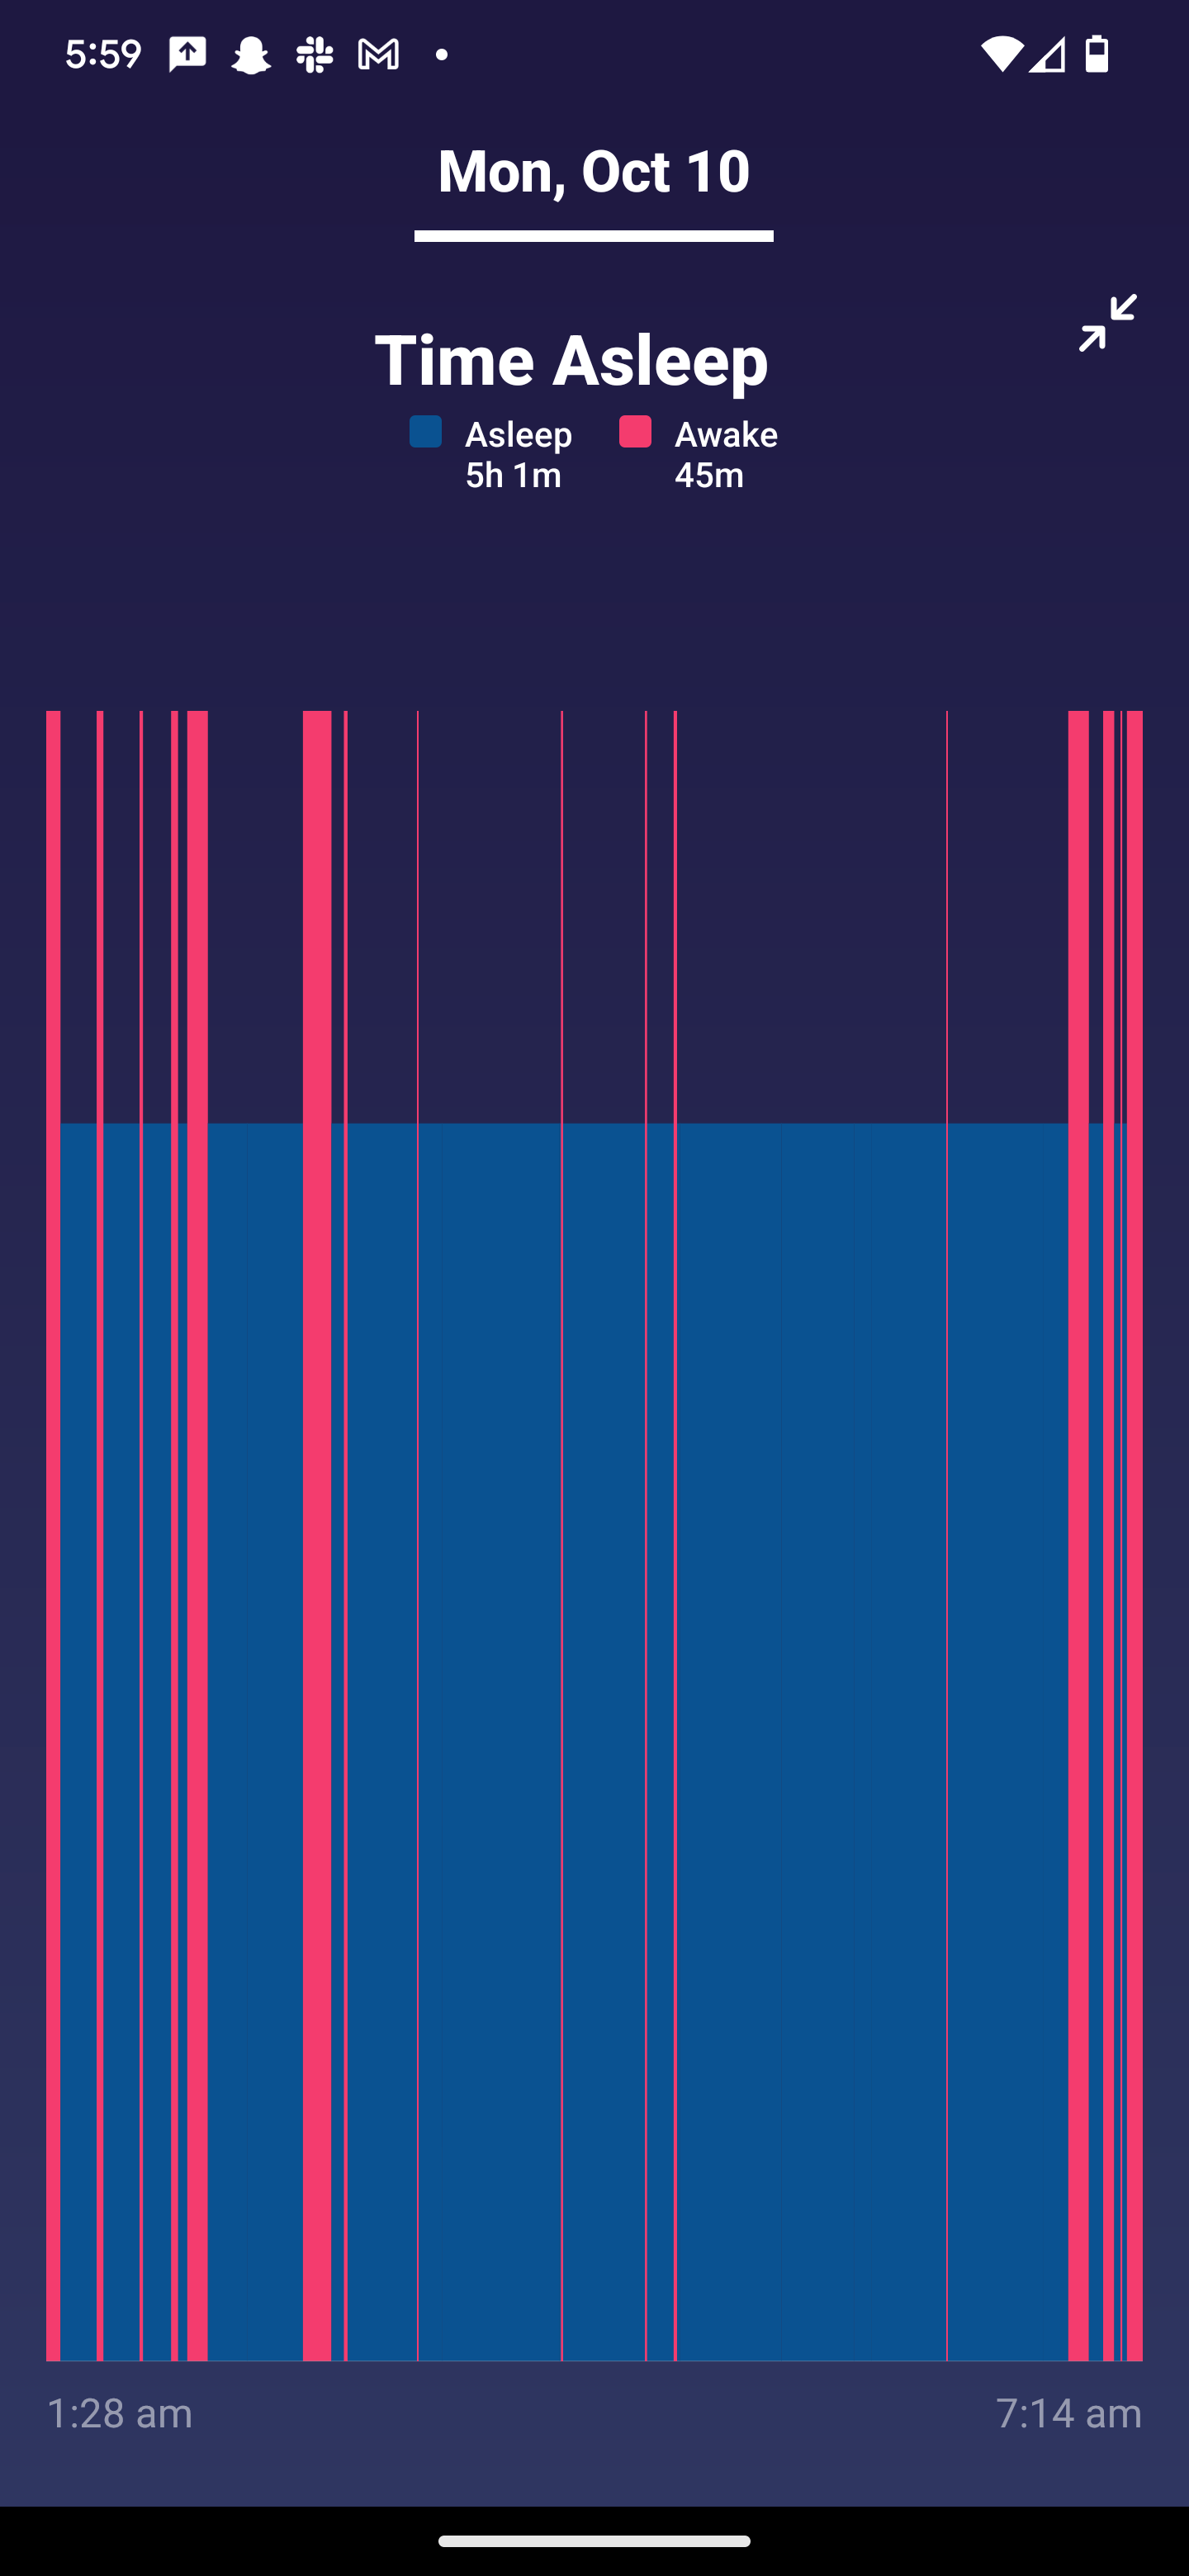 Sleep tracking insights on the Fitbit app using Pixel Watch data.